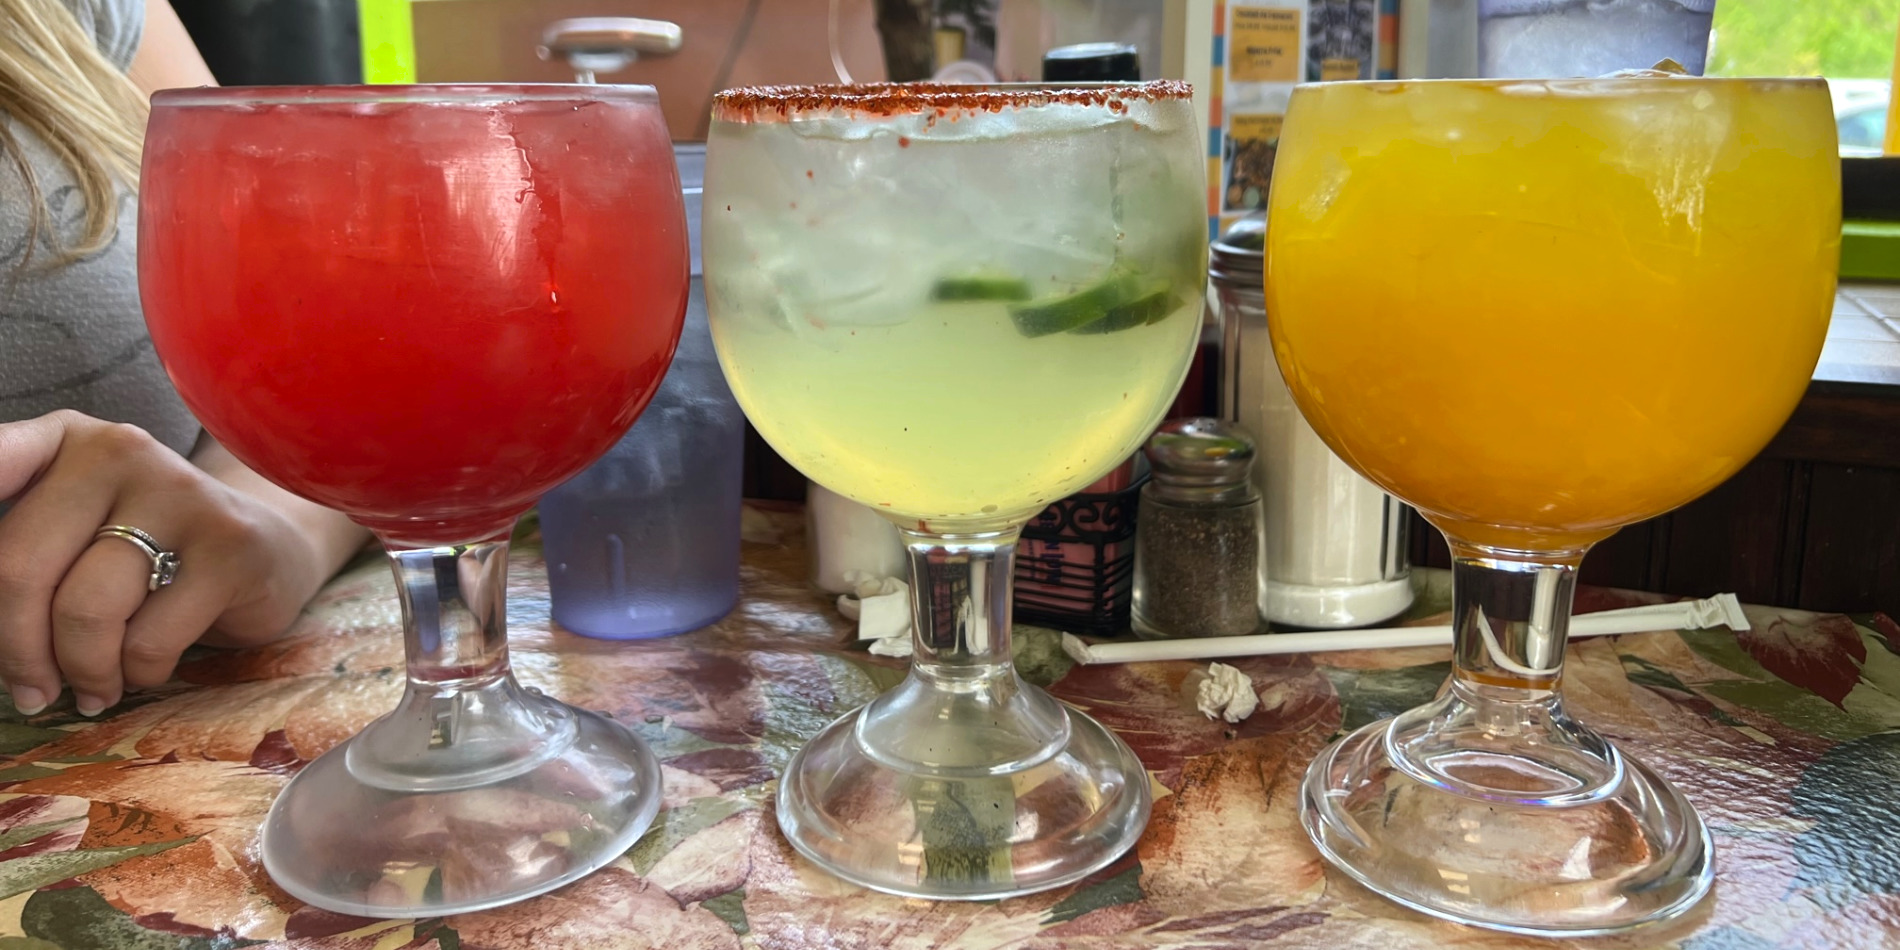 Three margaritas from Huaraches Moroleon in Urbana, Illinois are full. From the left, there is a strawberry one, a spicy jalapeno one, and a mango margarita. Photo by Alyssa Buckley.